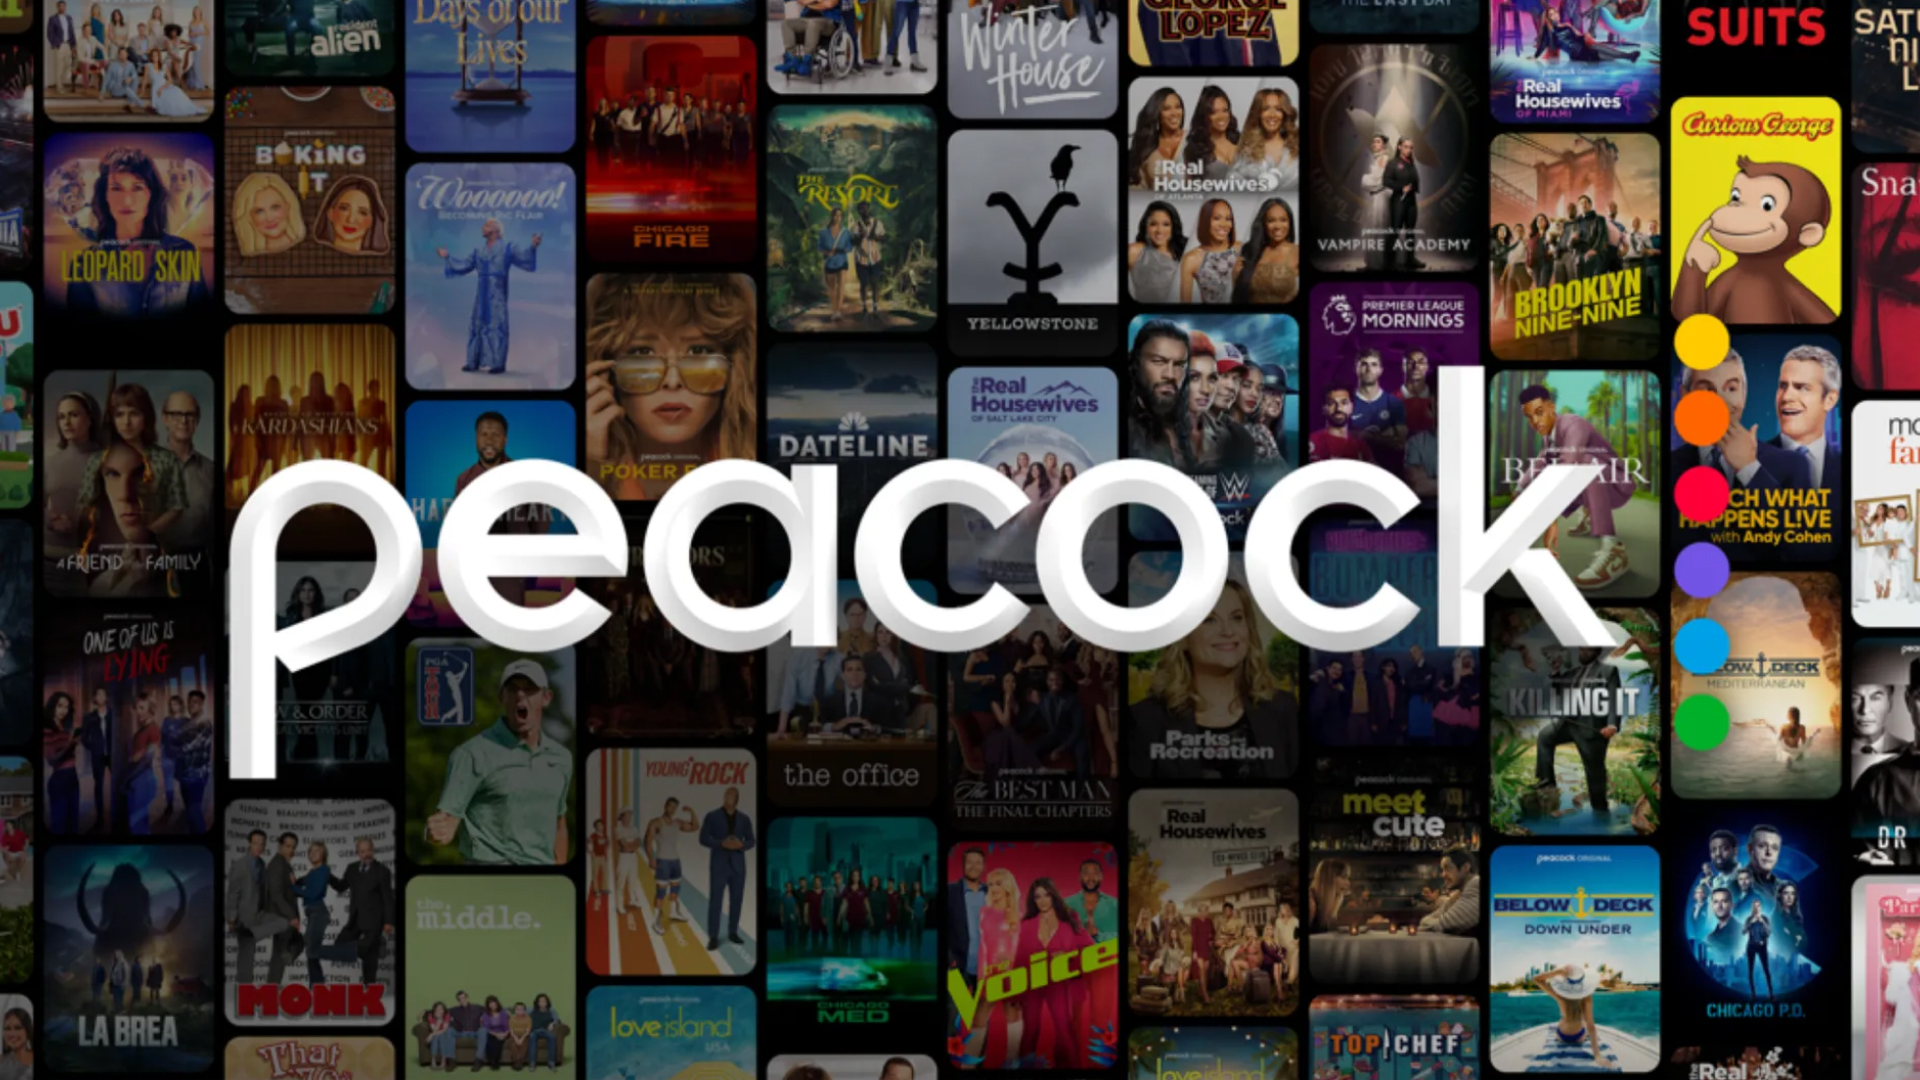 Peacock on Meta Quest Stream Current Movies, Hit TV Shows and Live Sports in VR Meta